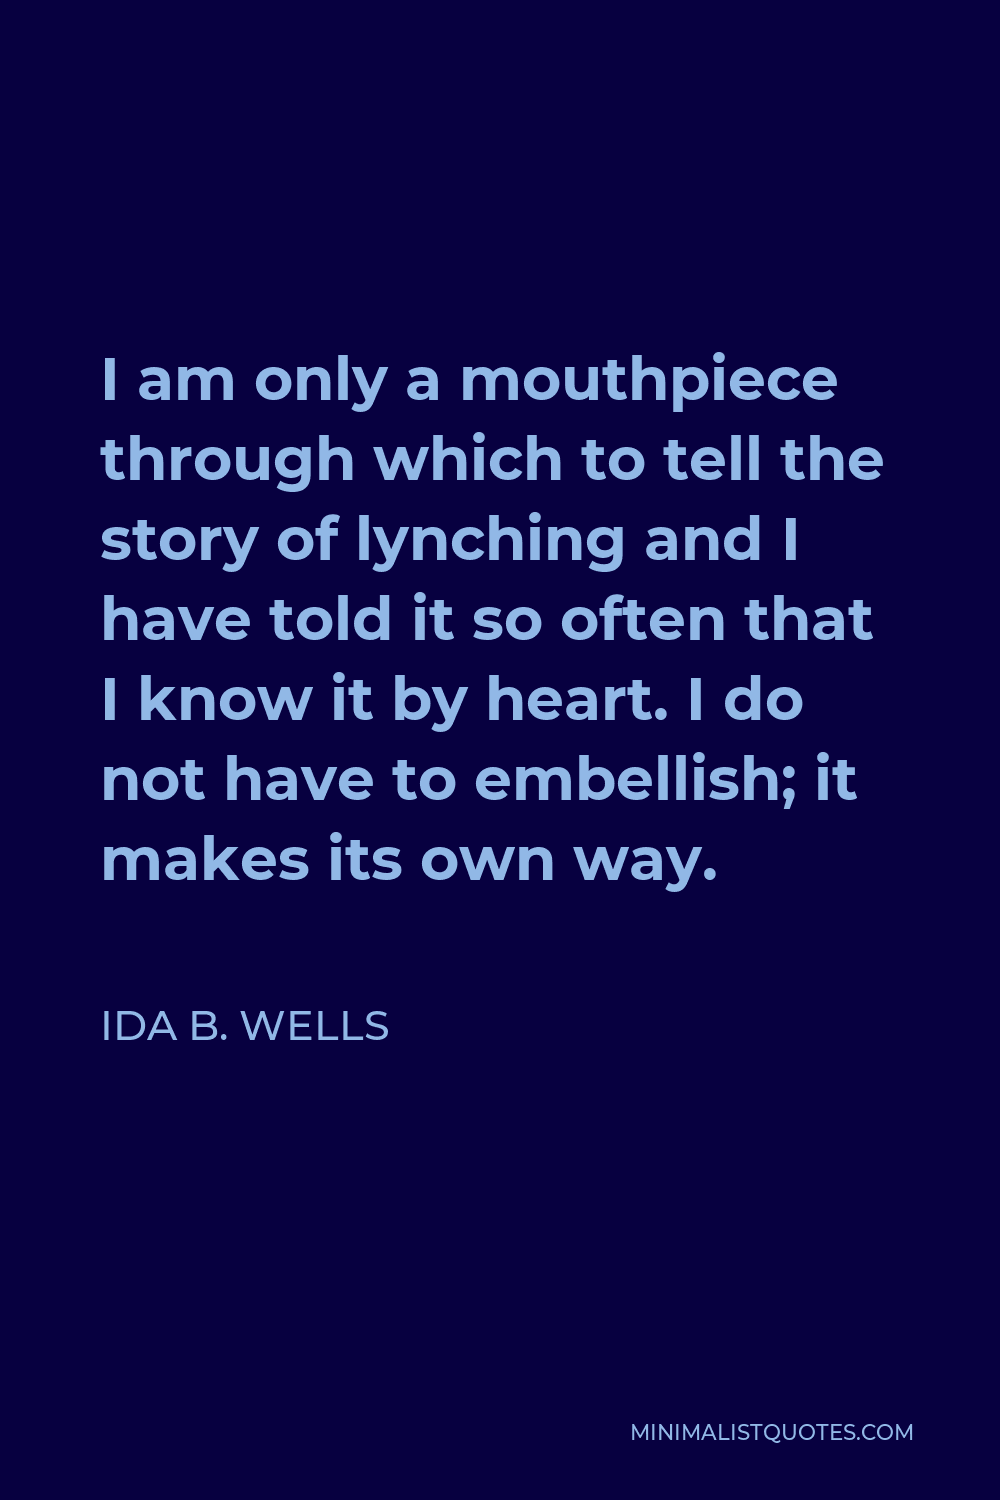 Ida B. Wells Quote - I am only a mouthpiece through which to tell the story of lynching and I have told it so often that I know it by heart. I do not have to embellish; it makes its own way.